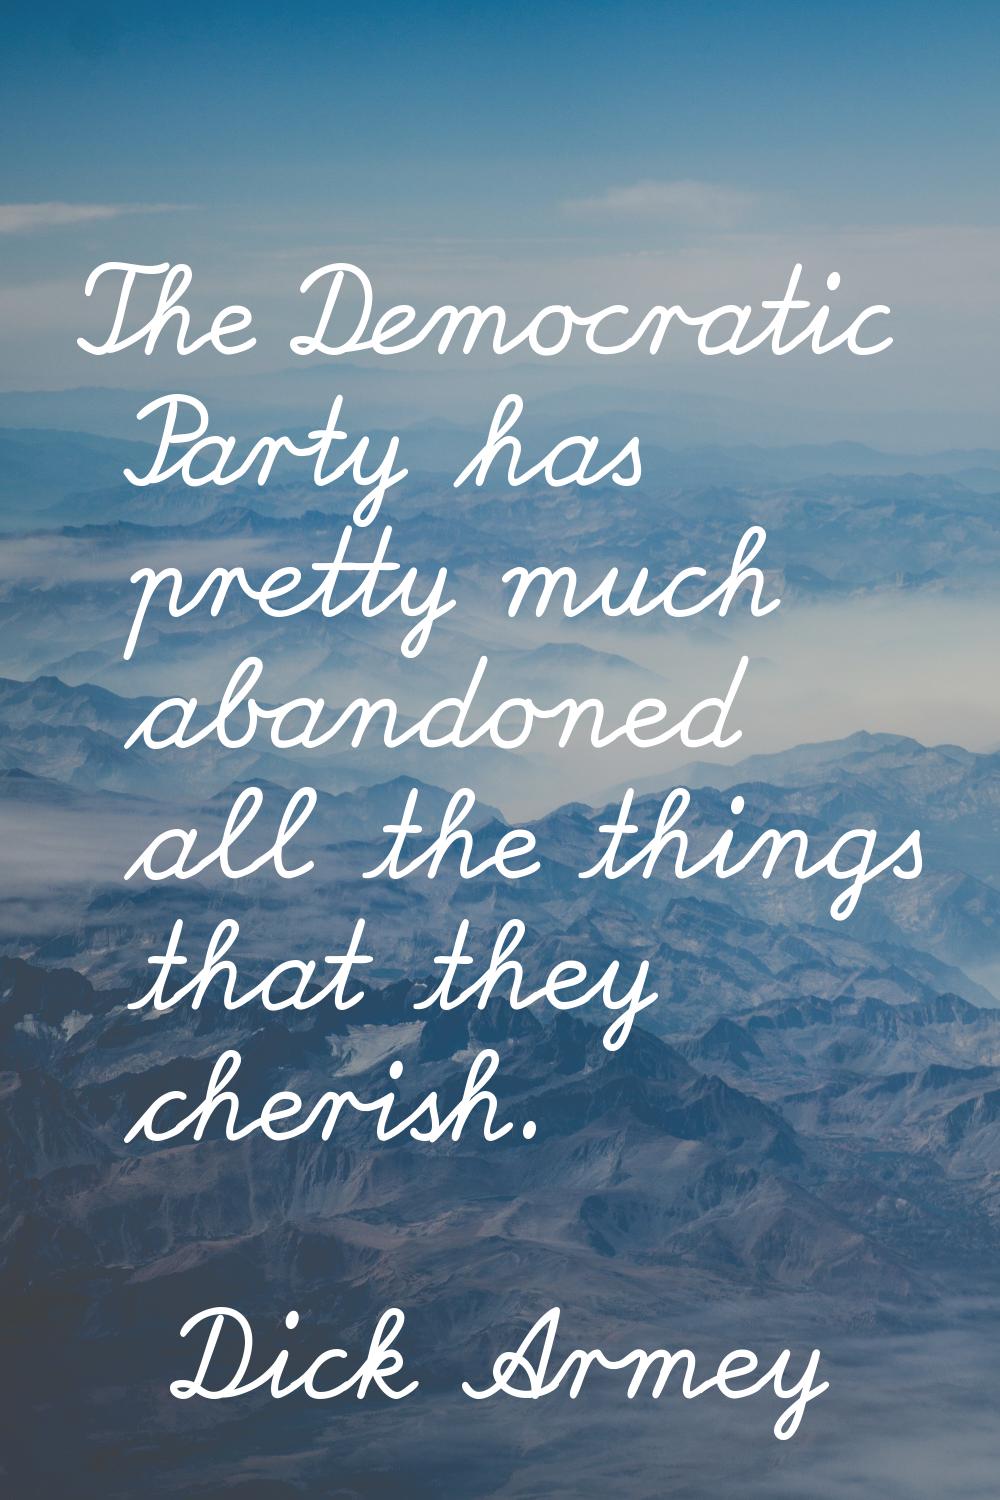 The Democratic Party has pretty much abandoned all the things that they cherish.